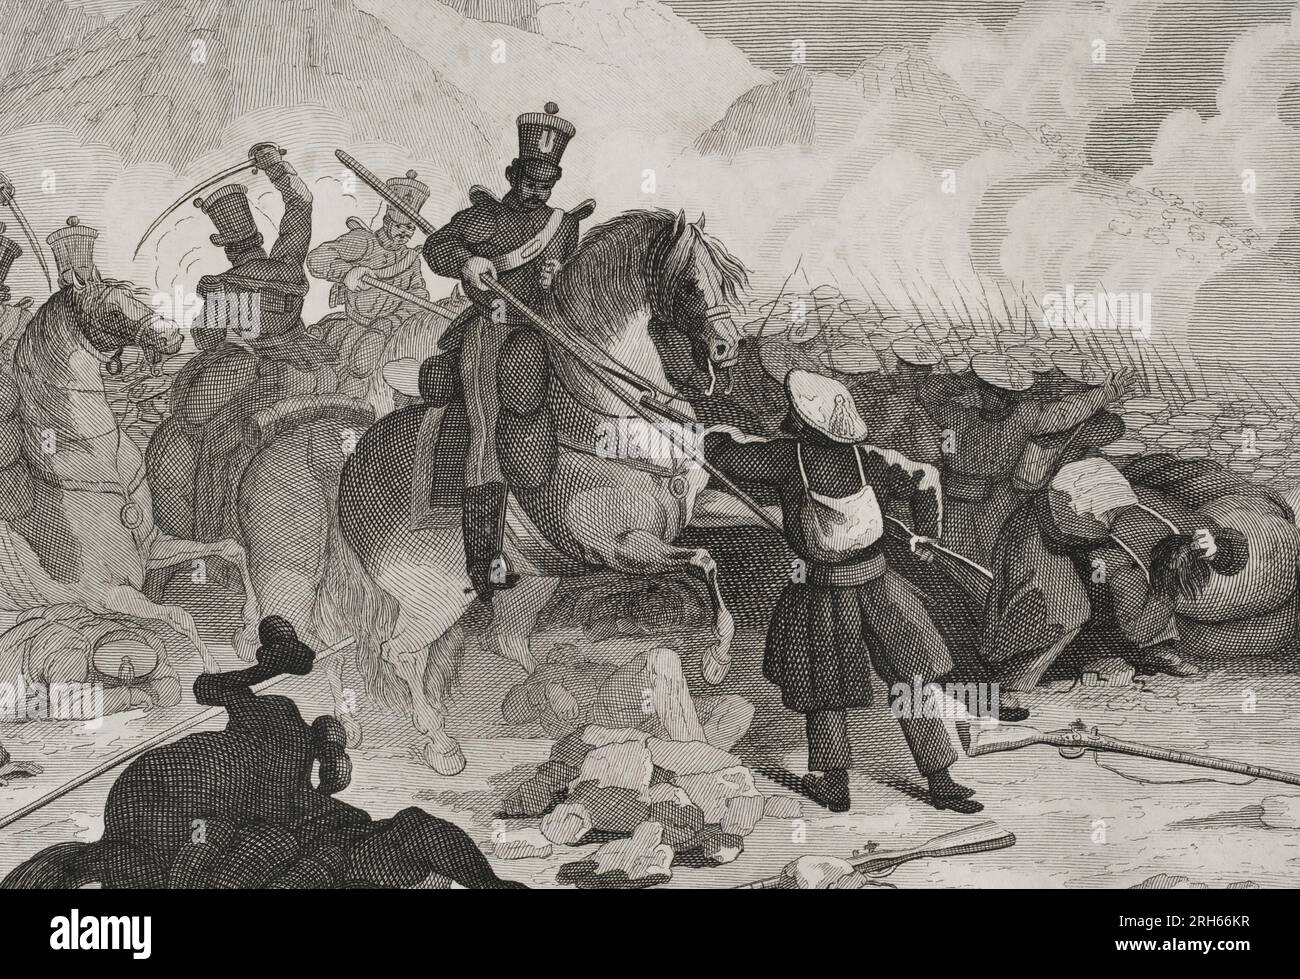 Spain. First Carlist War (1833-1840). Civil war that confronted Carlists, supporters of the Infante Carlos Maria Isidro de Borbon, against the Isabelinos (Elizabethans), defenders of Isabel II and the regent Maria Cristina de Borbon. Northern Front. Attack by Liberal troops on the road to Legazpia. Illustration by Manuel Miranda. Engraving by Pedro Celestino Mare. Detail. Panorama Espanol, Cronica Contemporanea. Madrid, 1842. Stock Photo